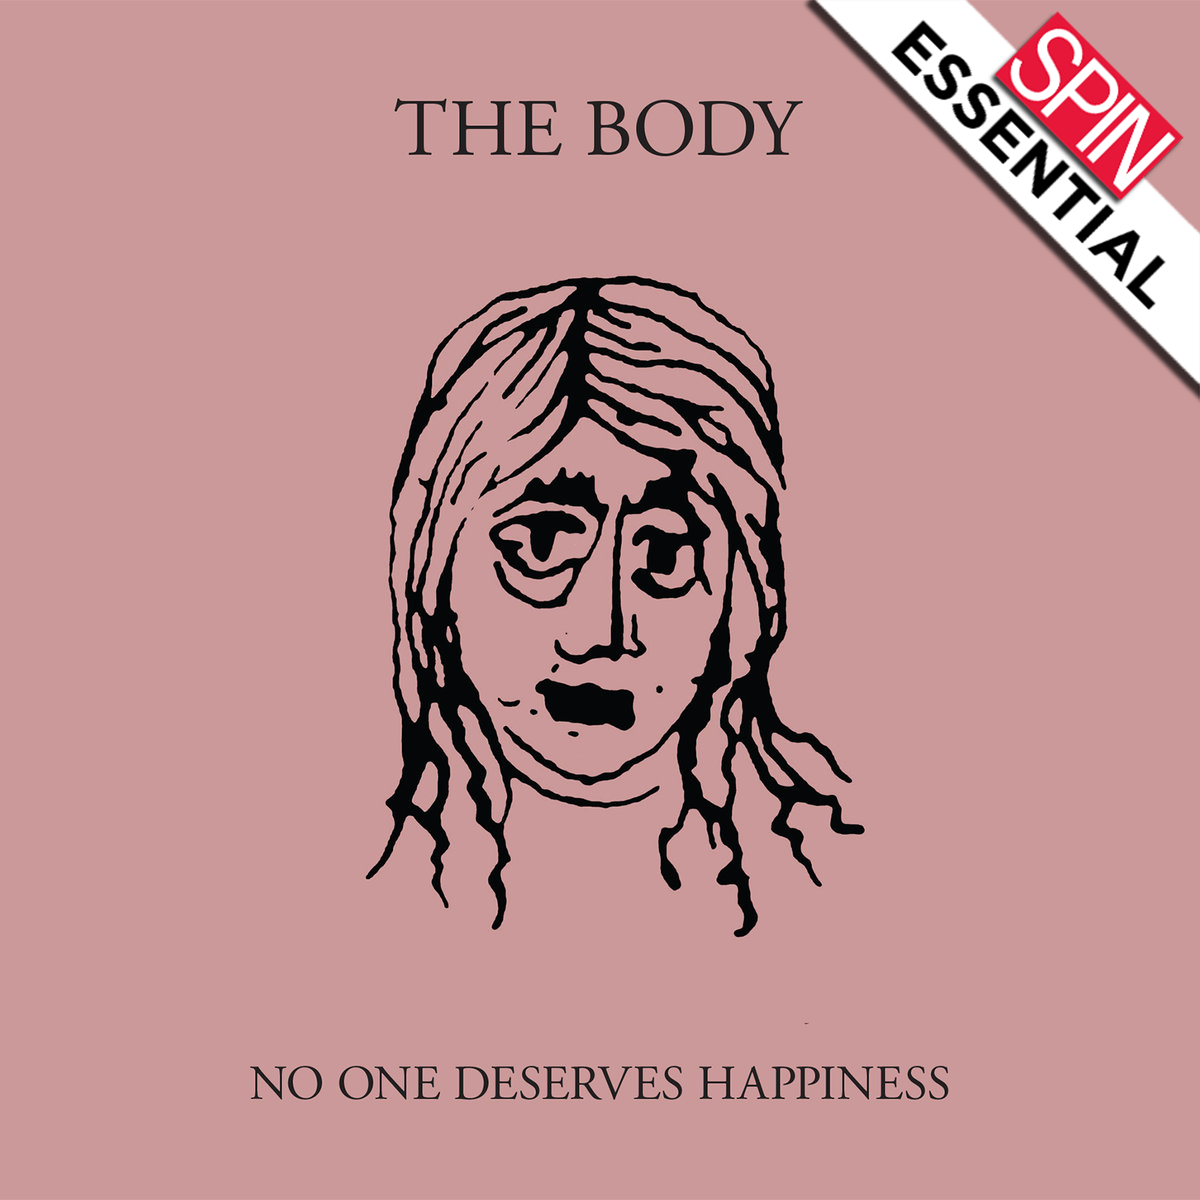 The Body's No One Deserves Happiness